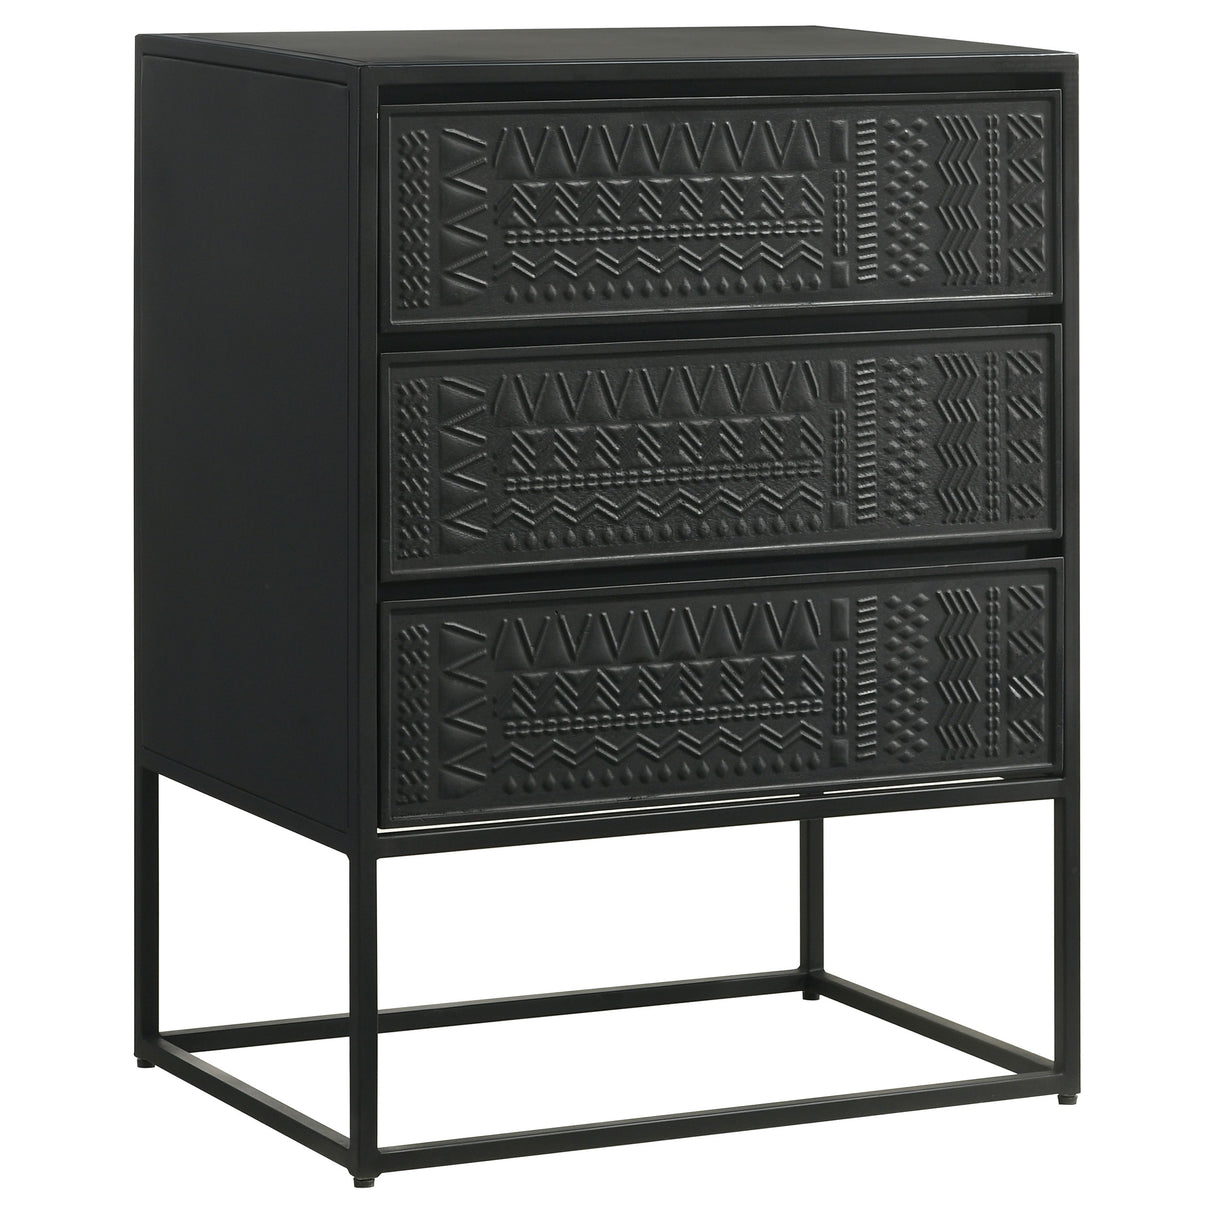 Tall Accent Cabinet - Alcoa 3-drawer Accent Cabinet